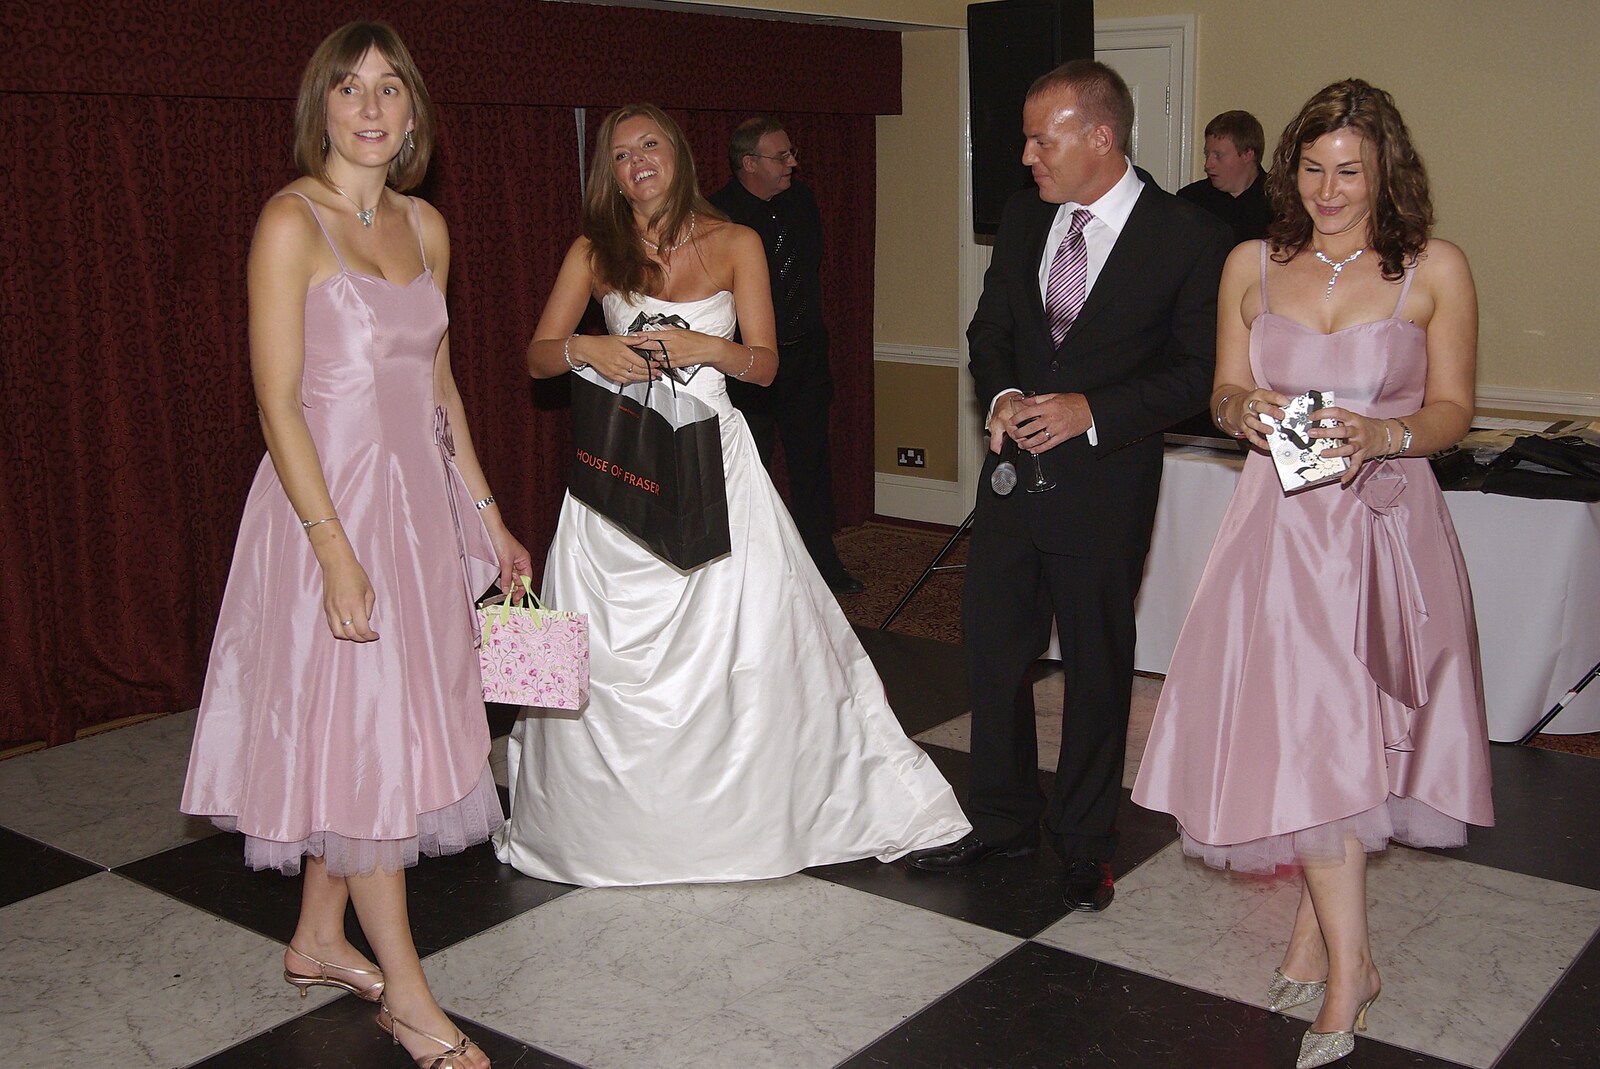 Matt's Wedding Reception, and a BSCC Presentation, Brome, Solihull and Stratford upon Avon - 6th October 2007: The bridesmaids get presents